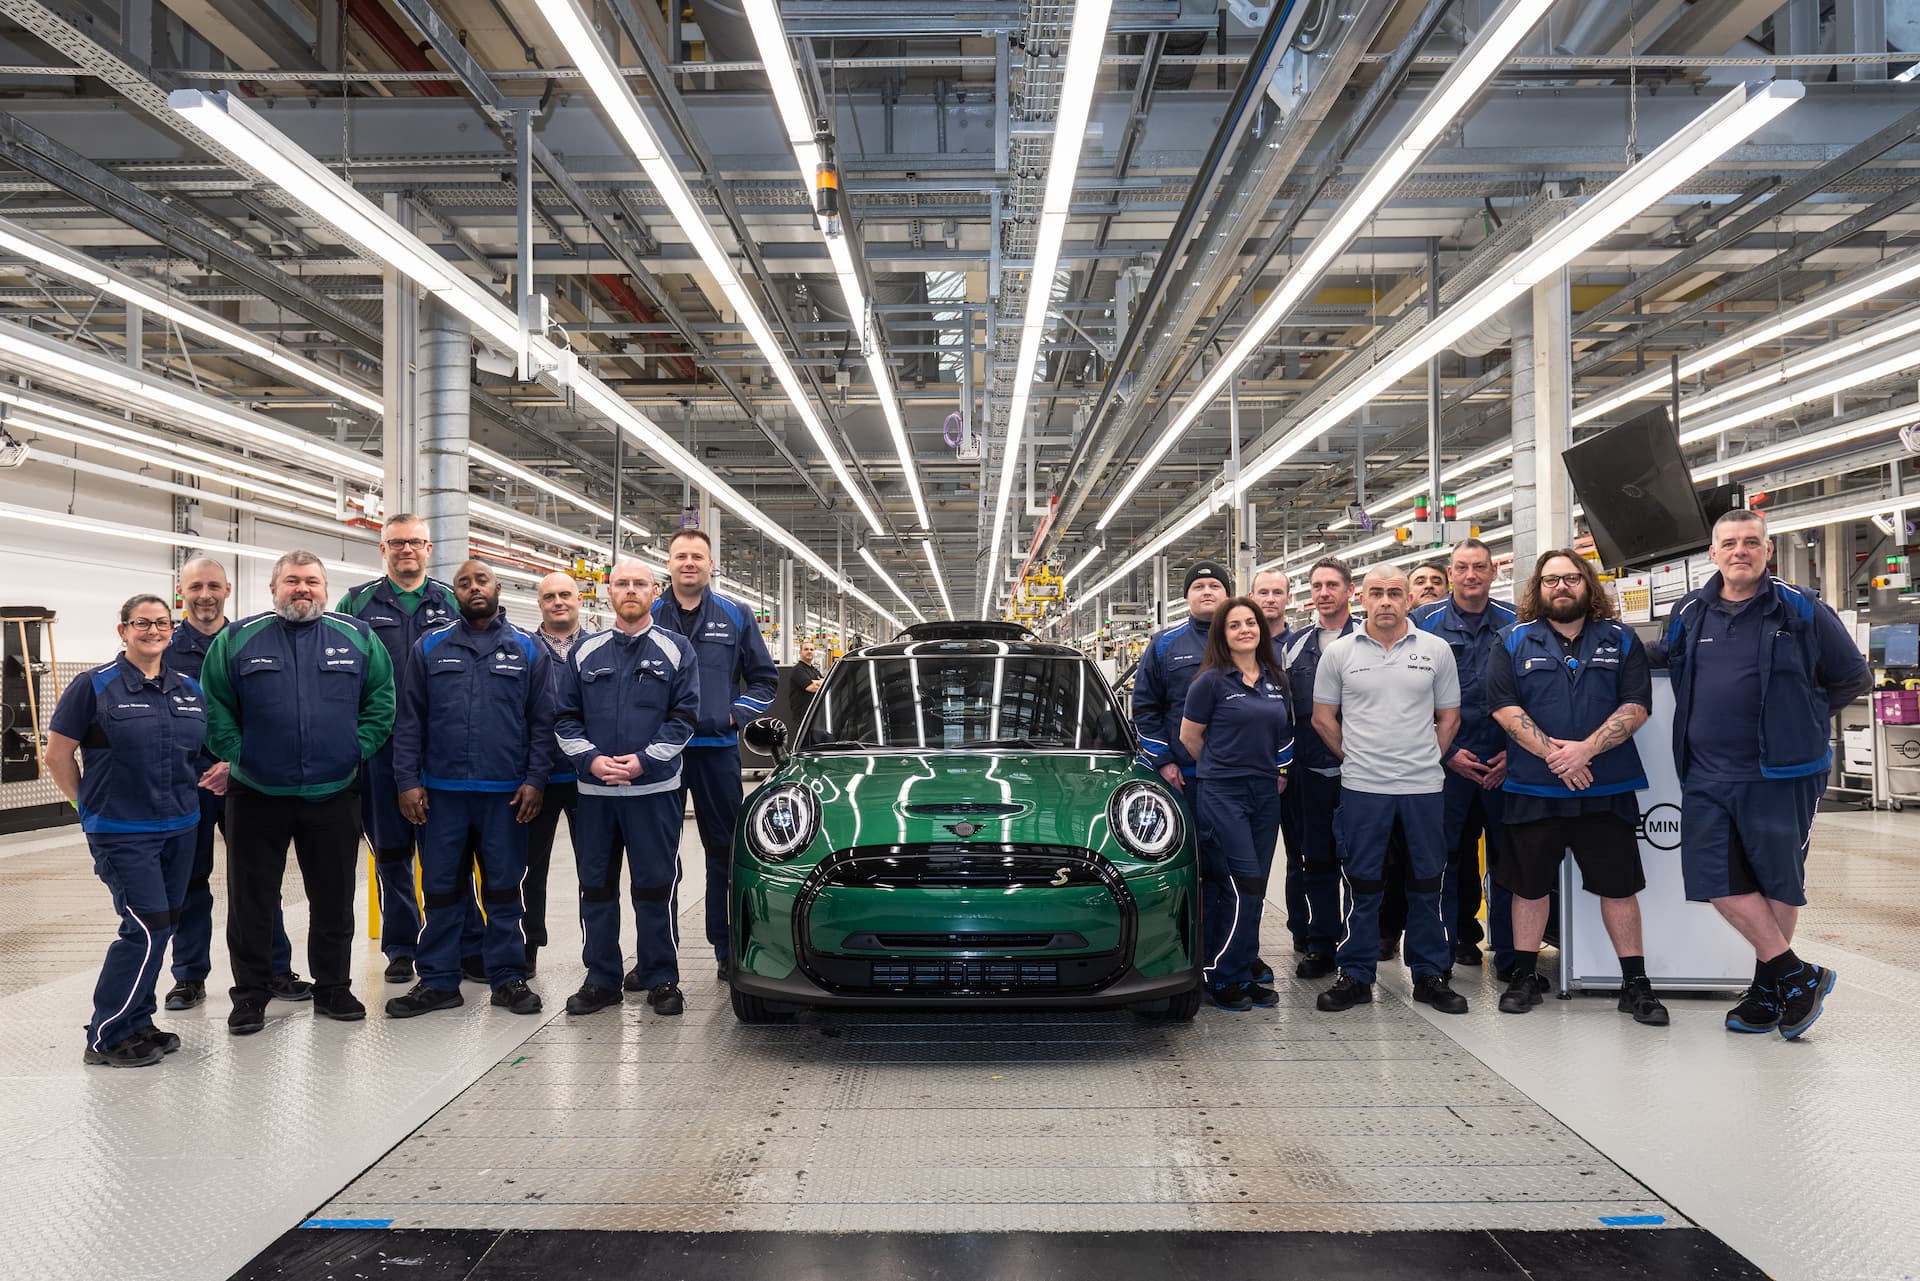 The one millionth MINI 3-door of the current generation